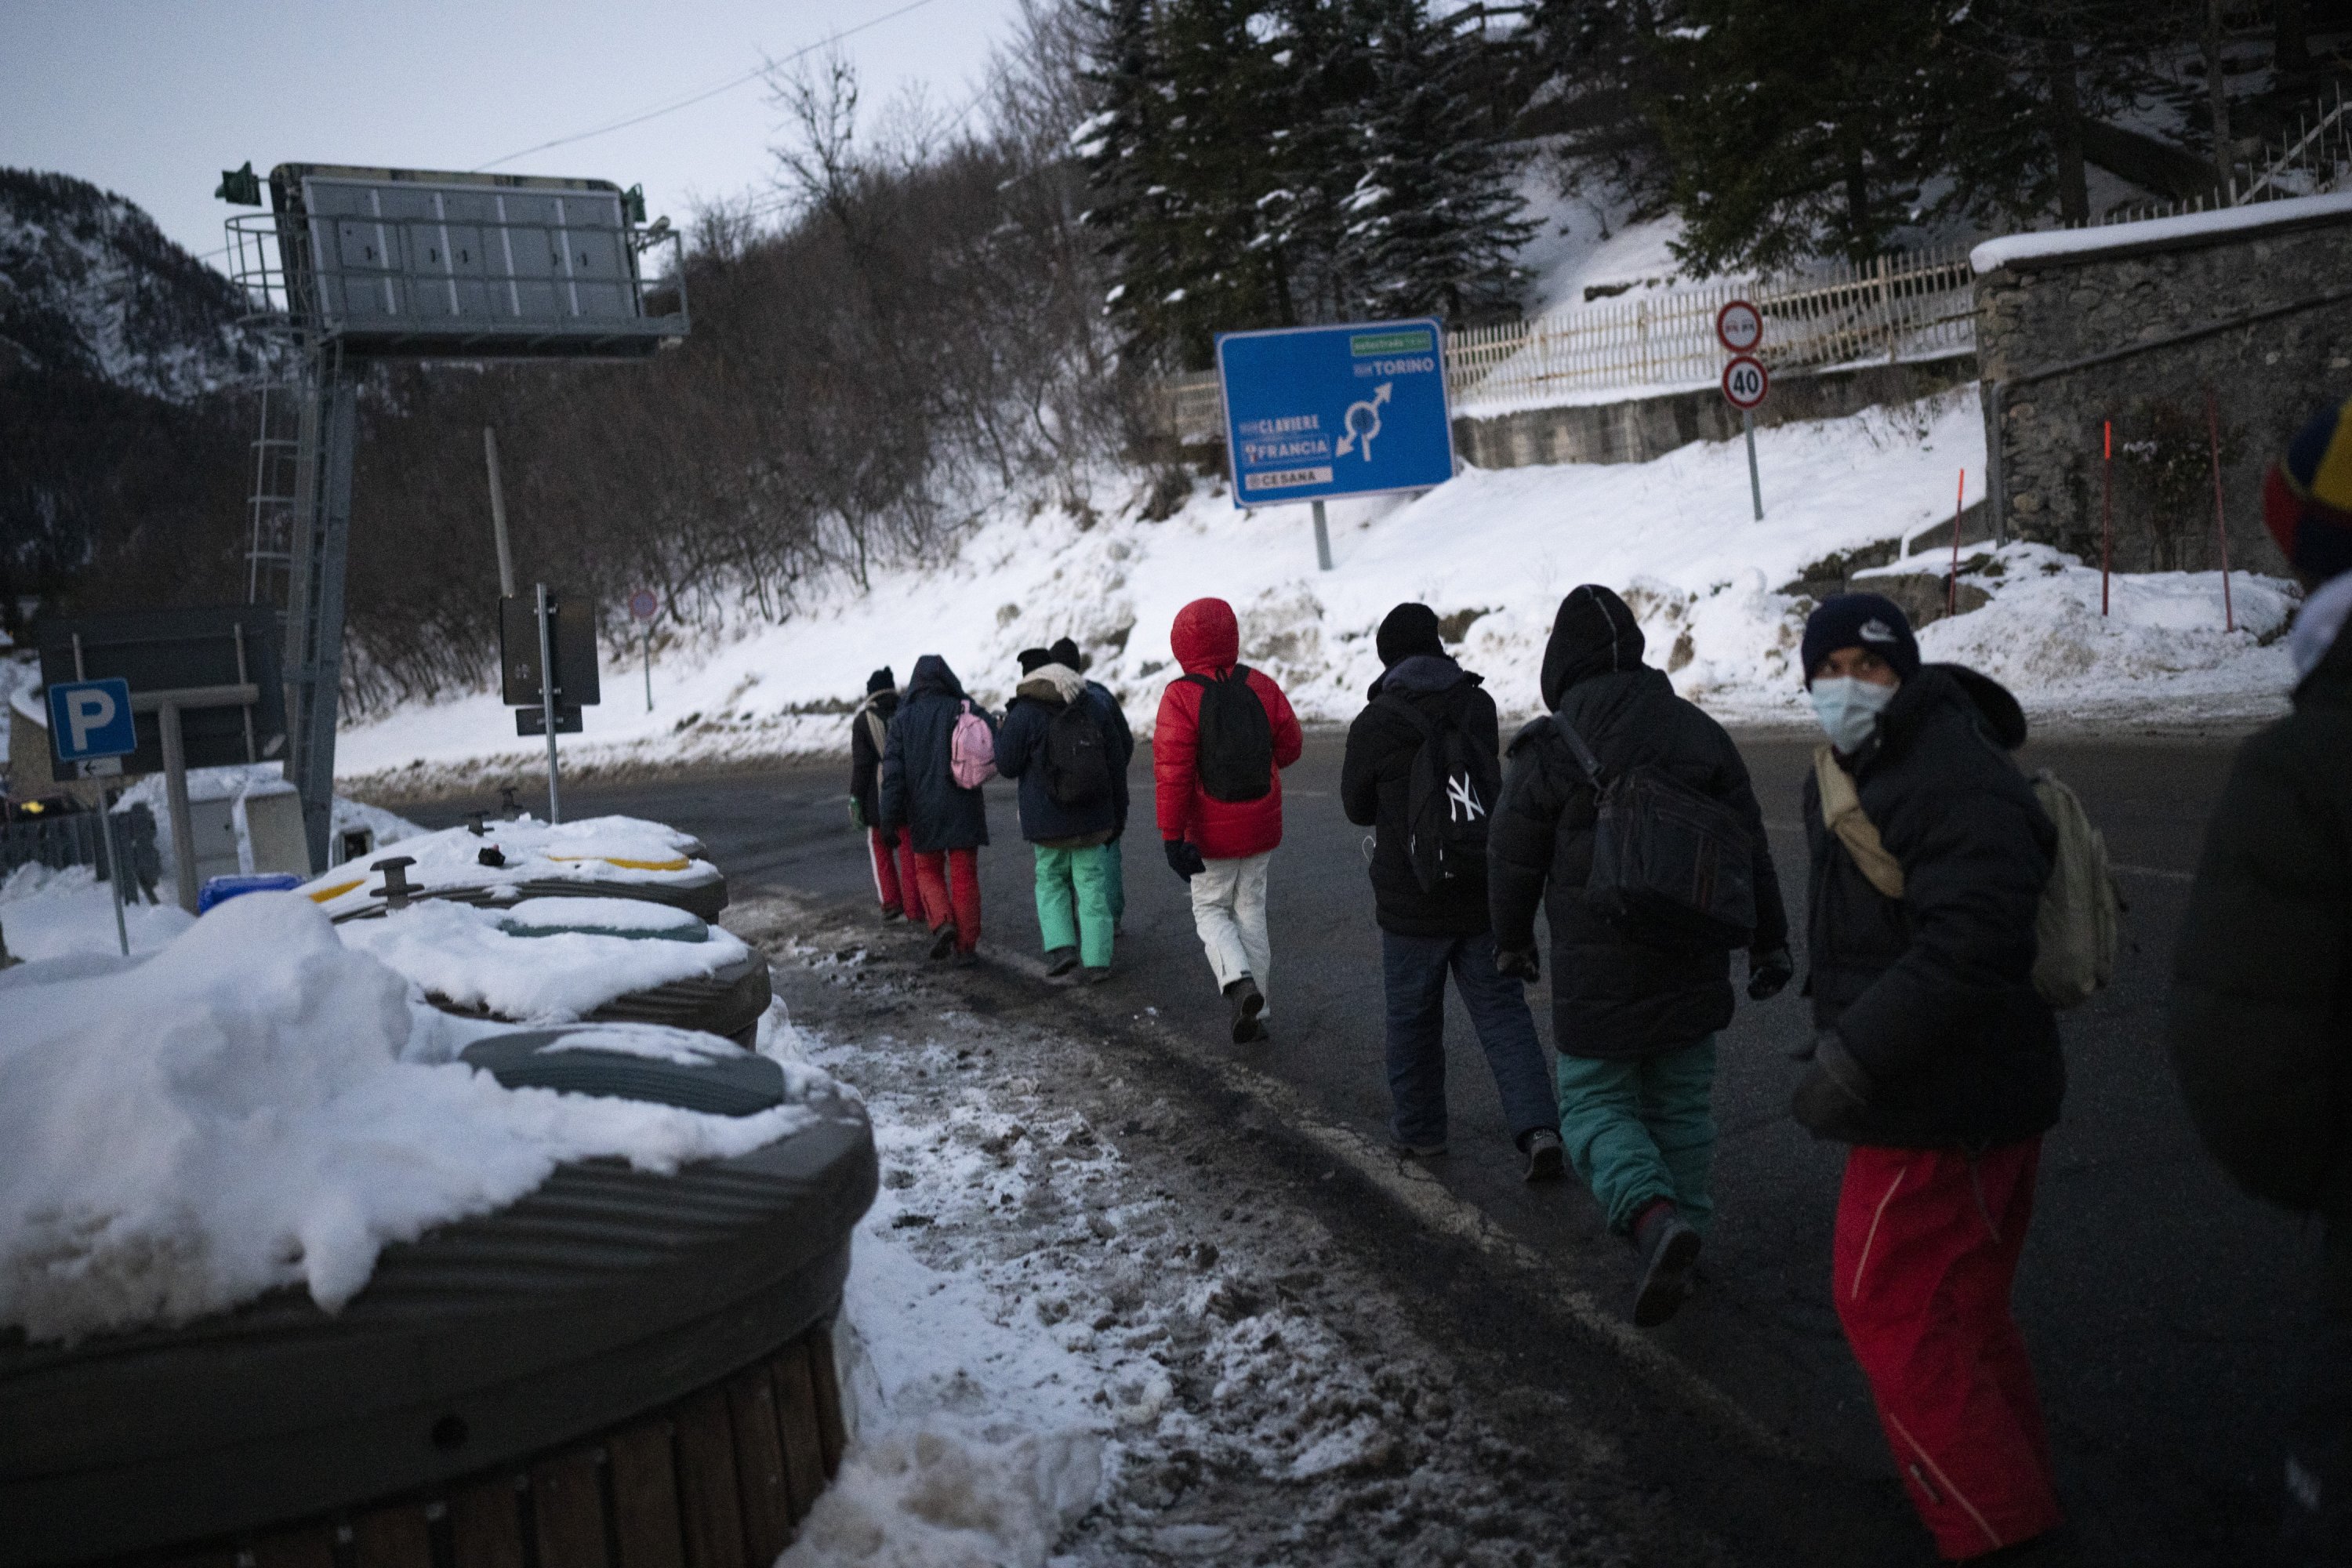 Migrants headed to France from Italy walk along a mountain road leading to the French-Italian border, Dec. 11, 2021. (AP Photo)